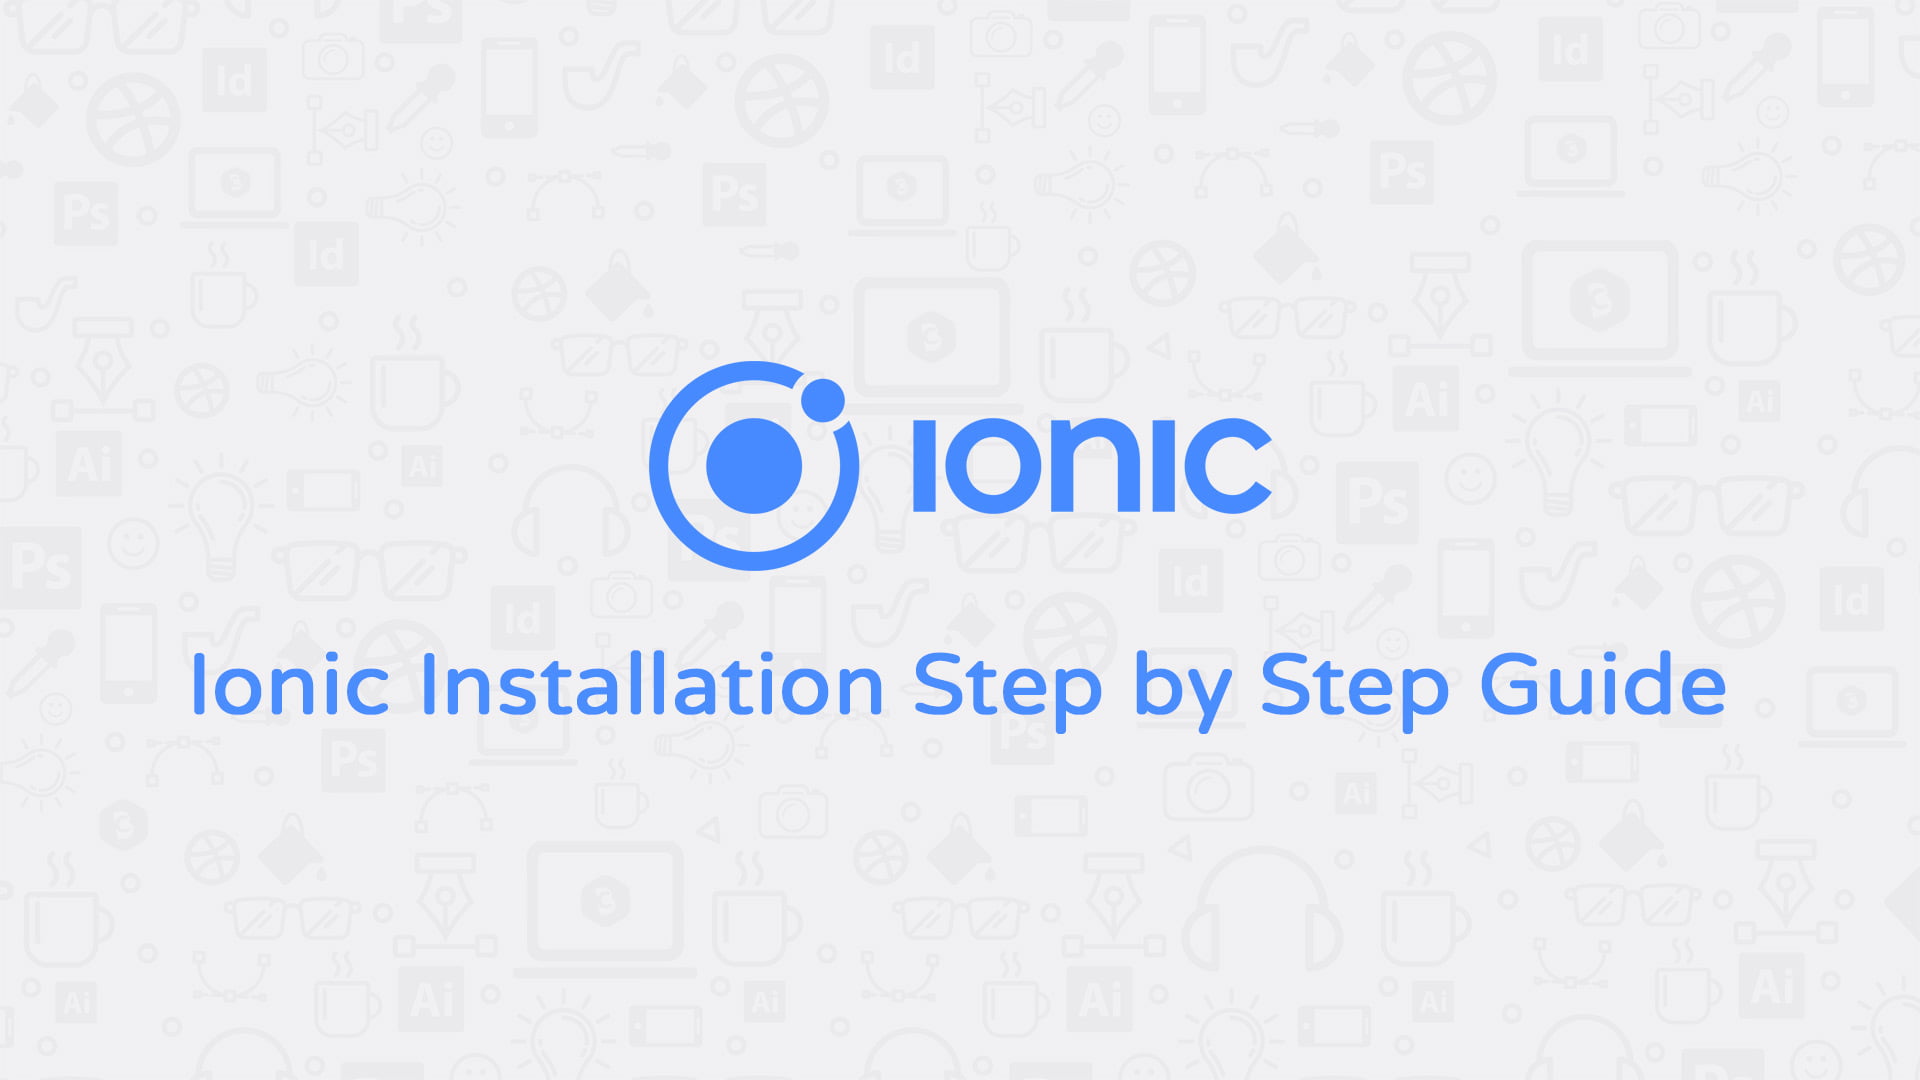 Ionic Installation Step by Step Guide